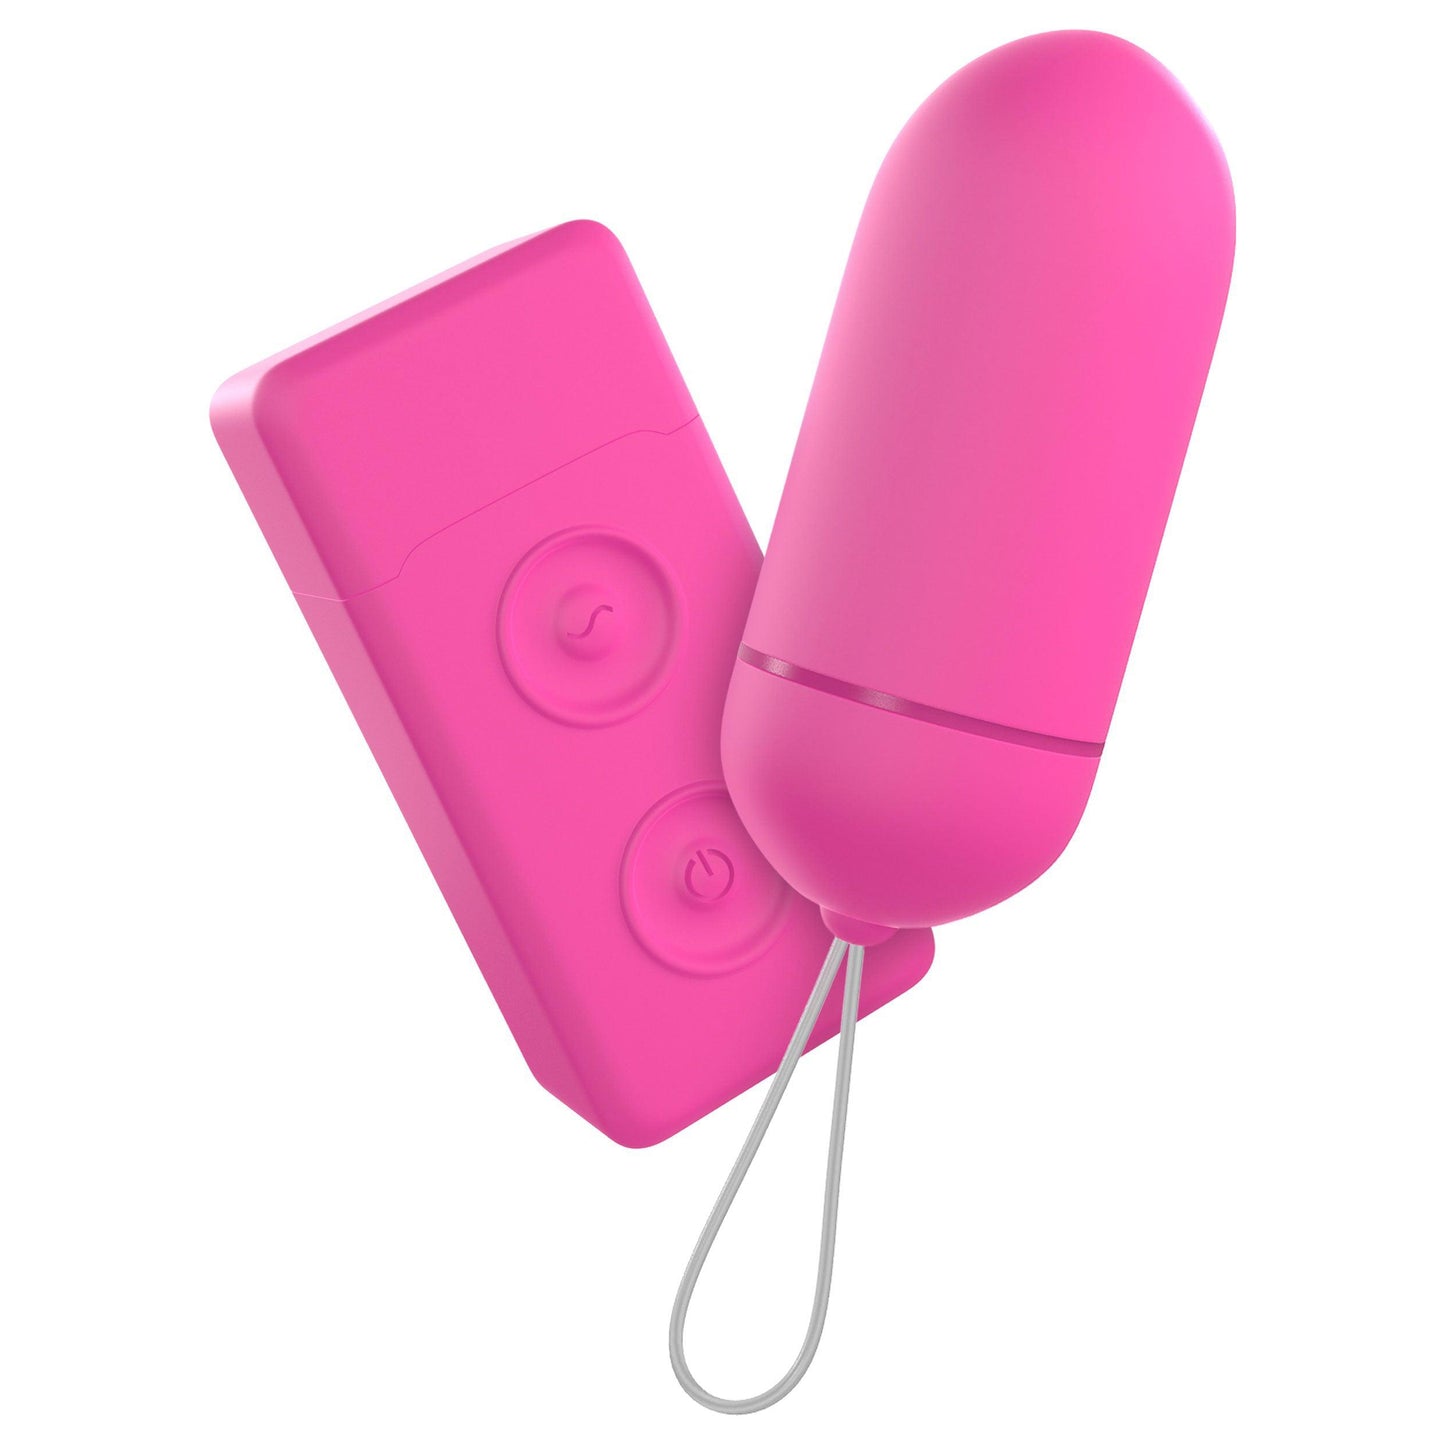 Neon Luv Touch Remote Control Bullet - Pink